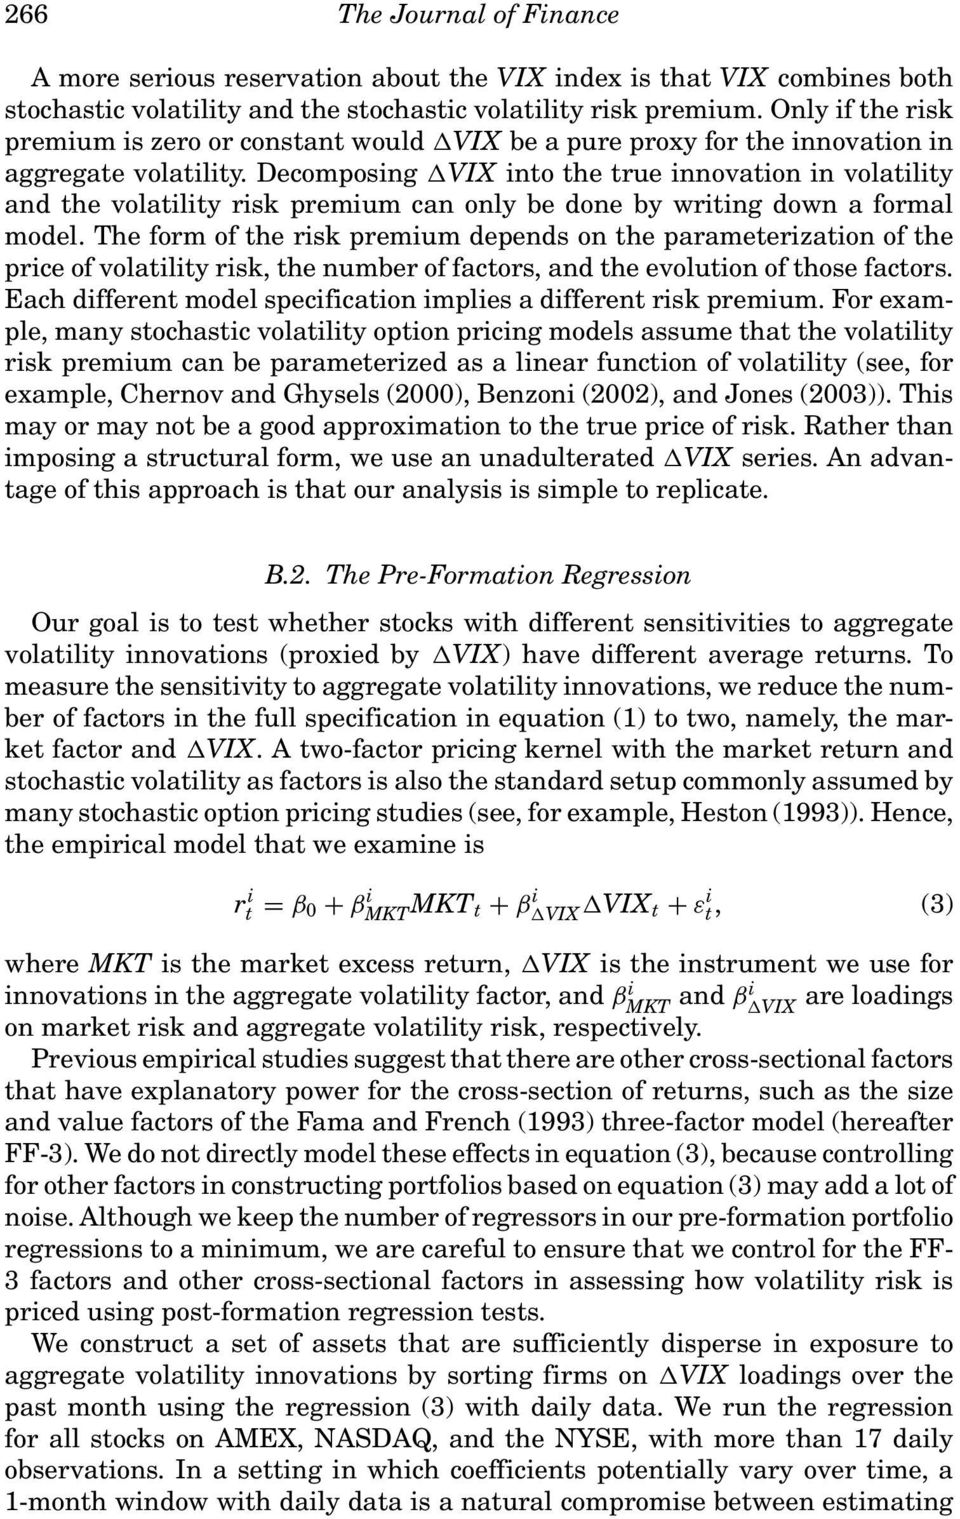 Decomposing VIX into the true innovation in volatility and the volatility risk premium can only be done by writing down a formal model.